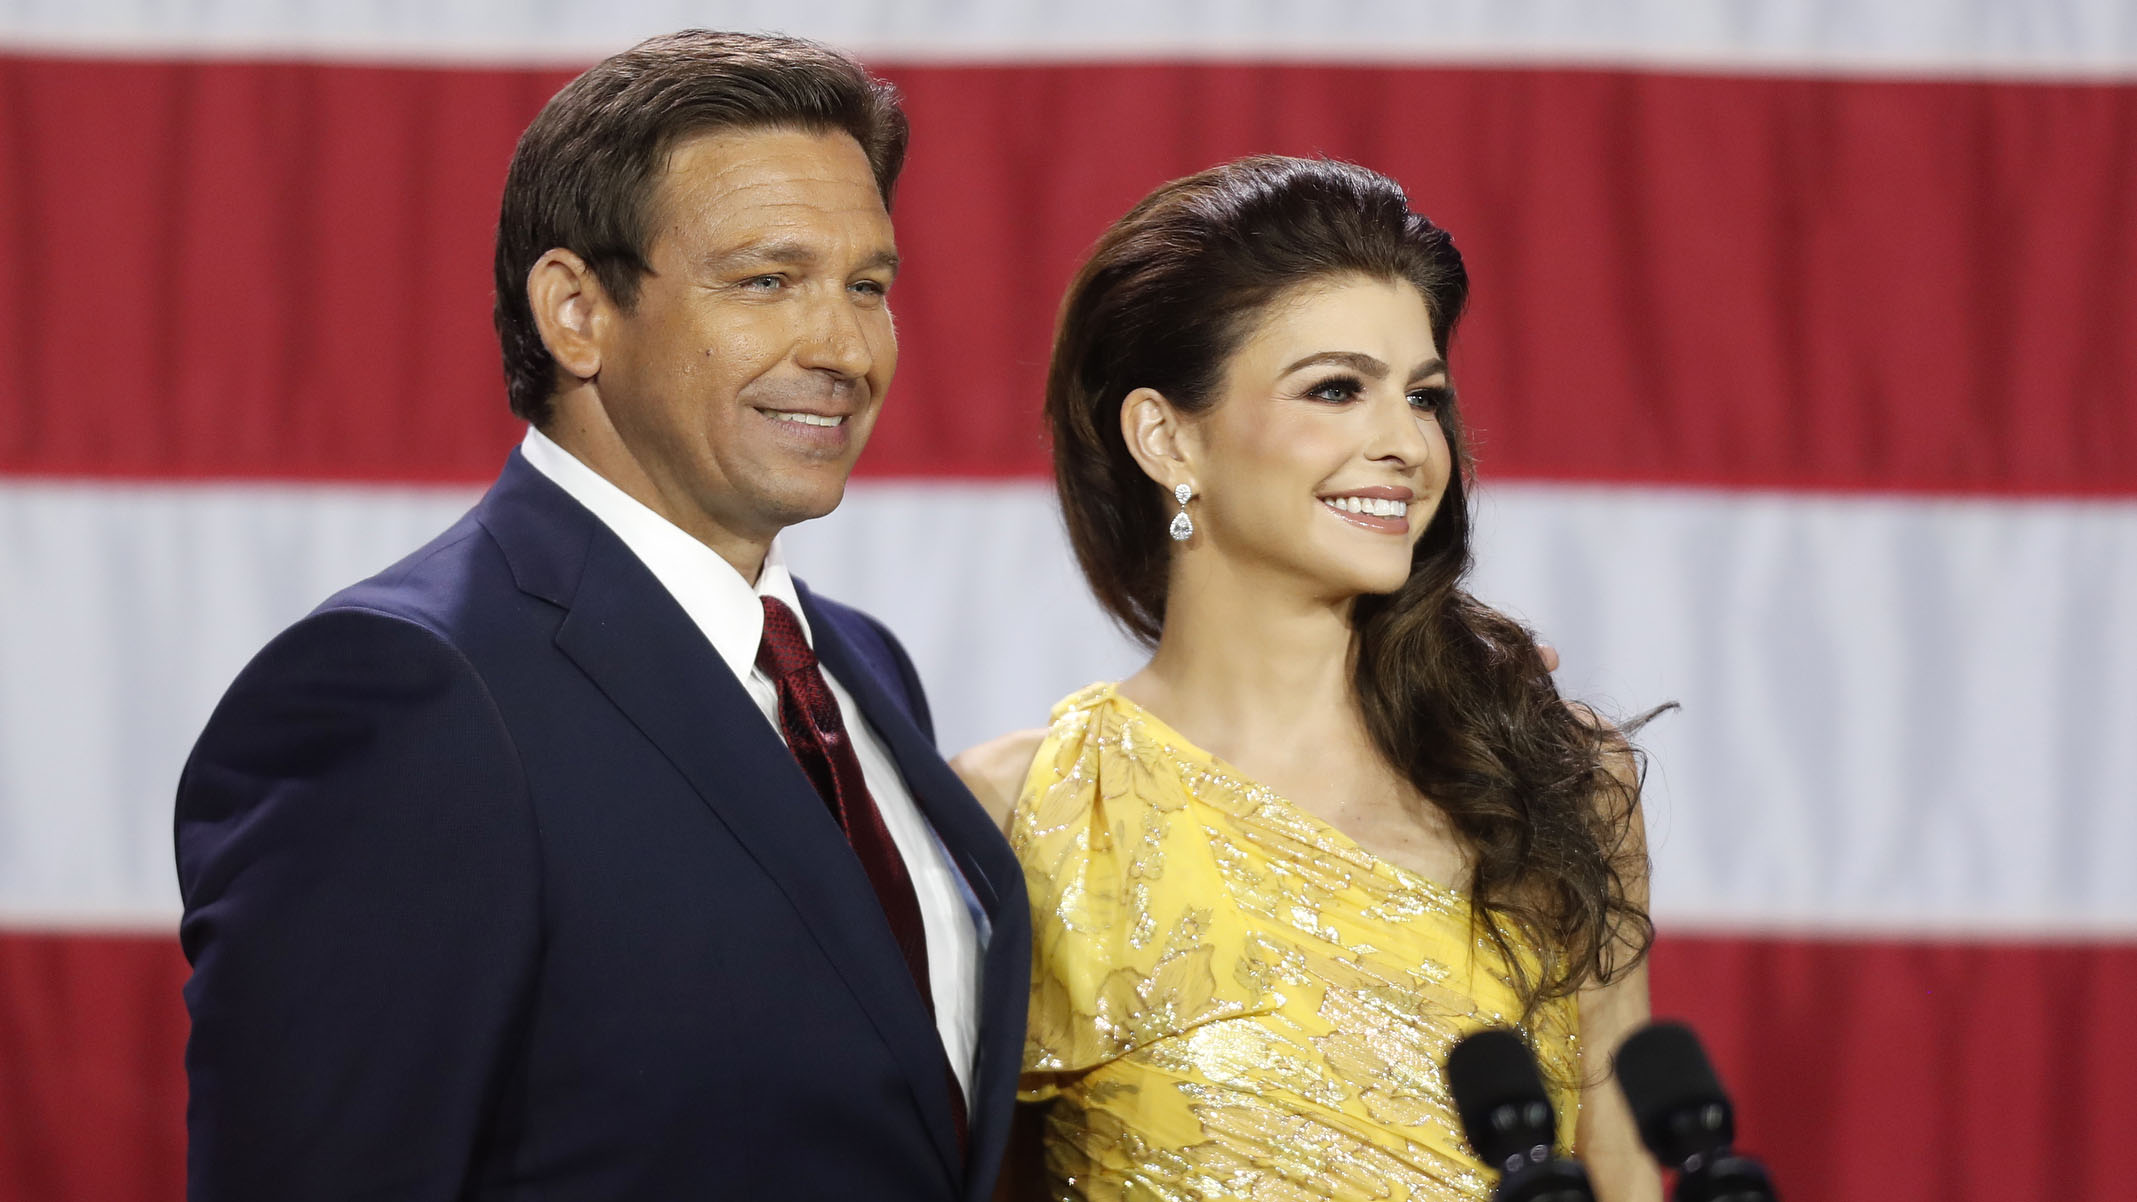 Trump ‘Workshopping’ Three More Derogatory Names For DeSantis, Digging Up ‘Dirt’ On His Wife Casey: Report